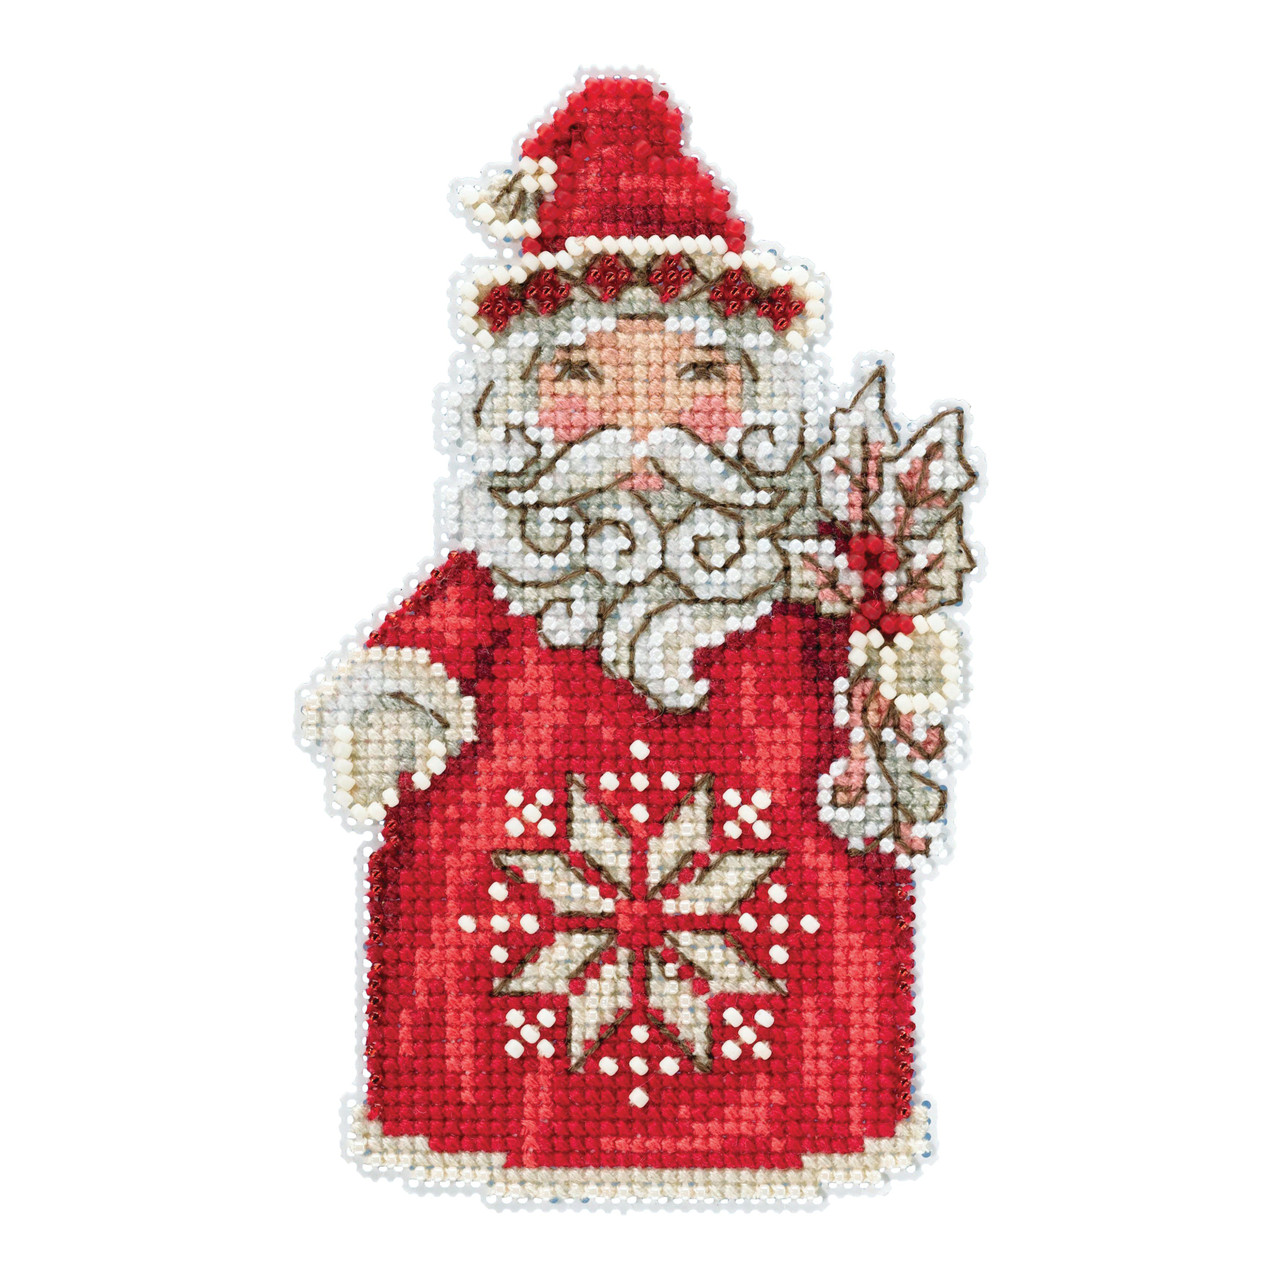 5x5 18 Count - Jim Shore Reindeer Counted Cross Stitch Kit - Mill Hill